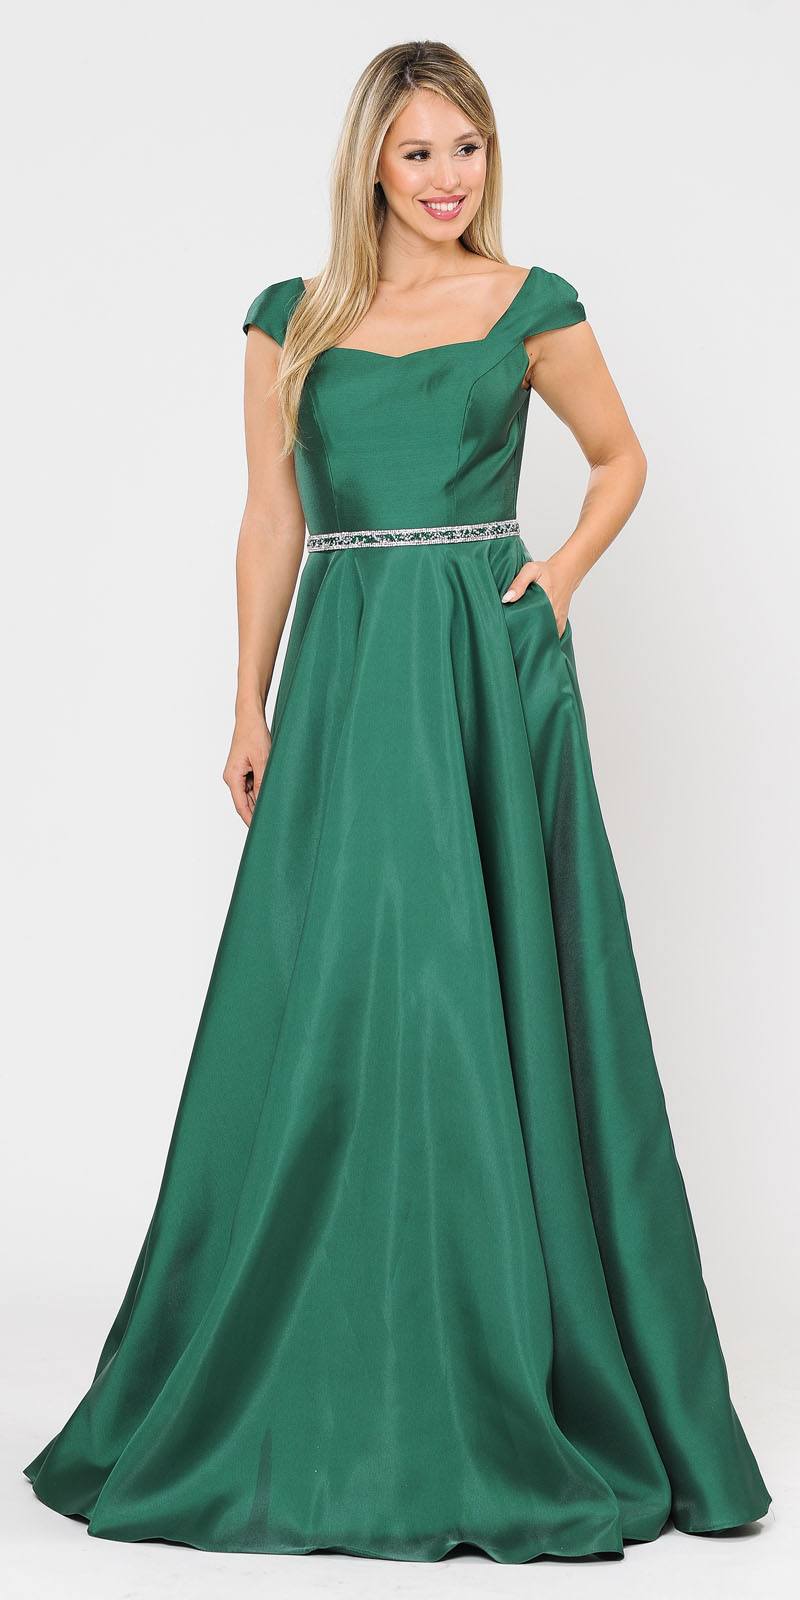 Green Cap Sleeved Long Prom Dress with Pockets